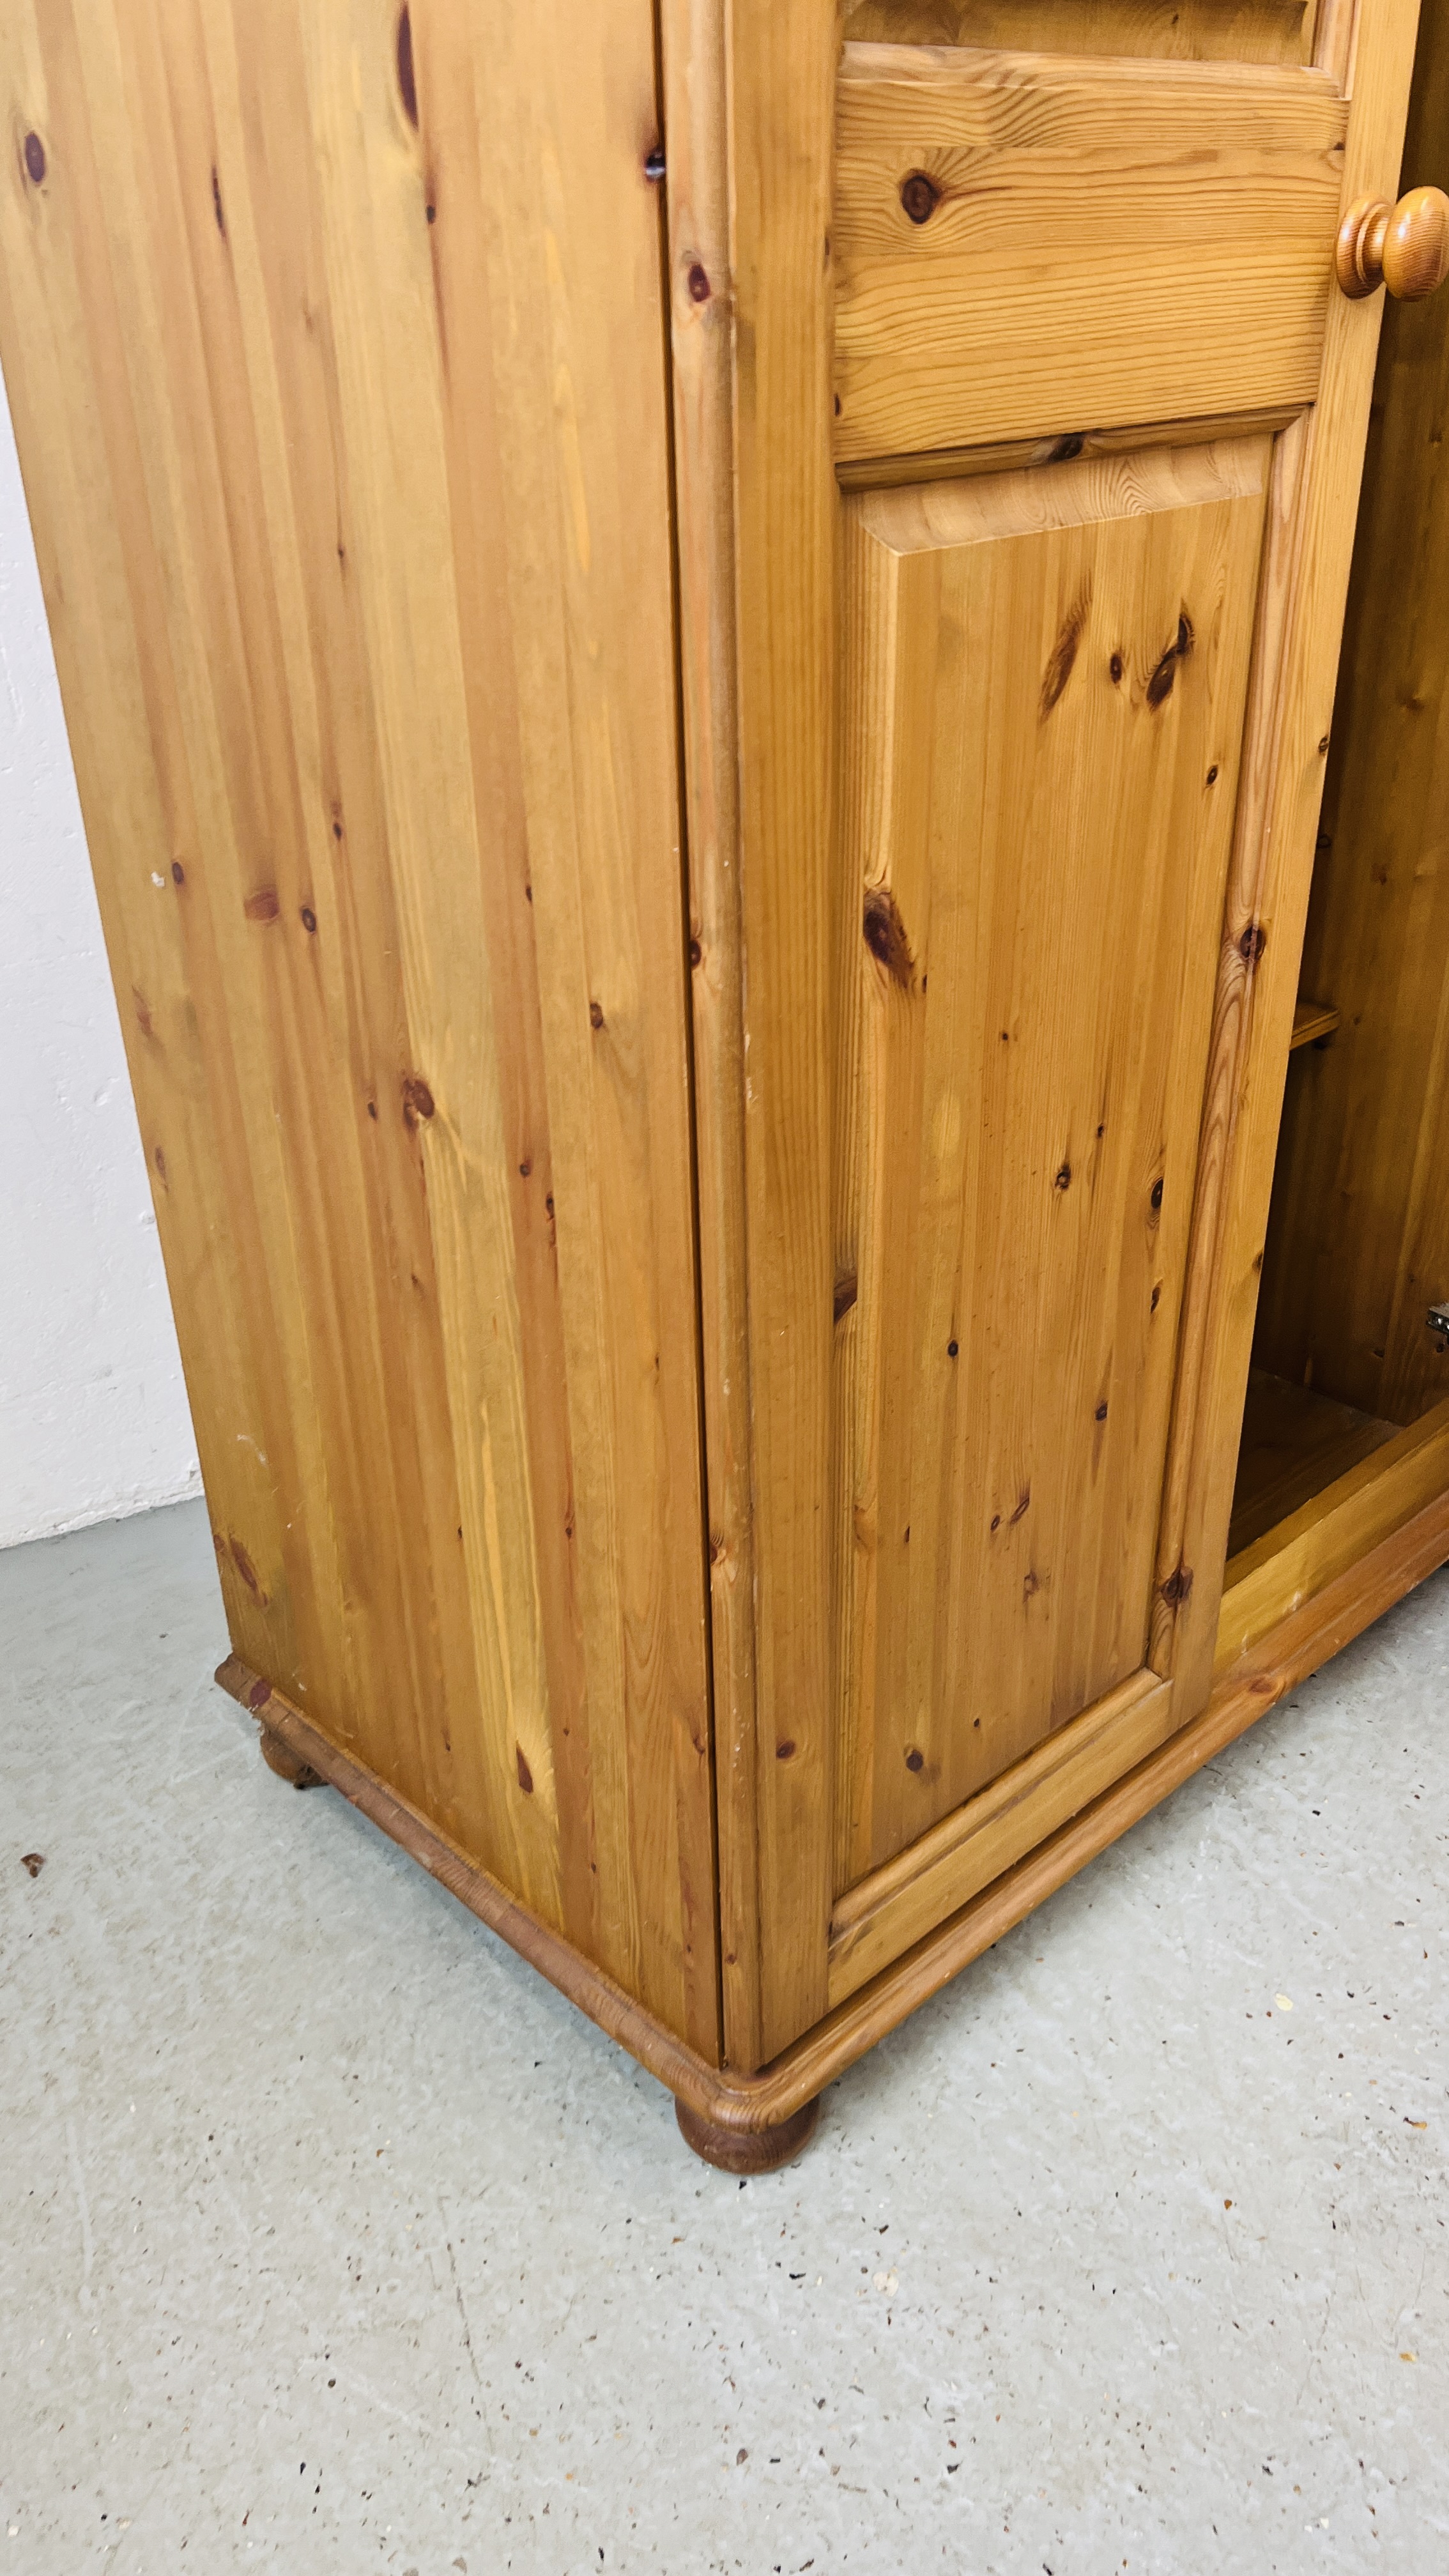 A GOOD QUALITY SOLID HONEY PINE DOUBLE WARDROBE W 96CM, D 56CM, H 188CM. - Image 8 of 8